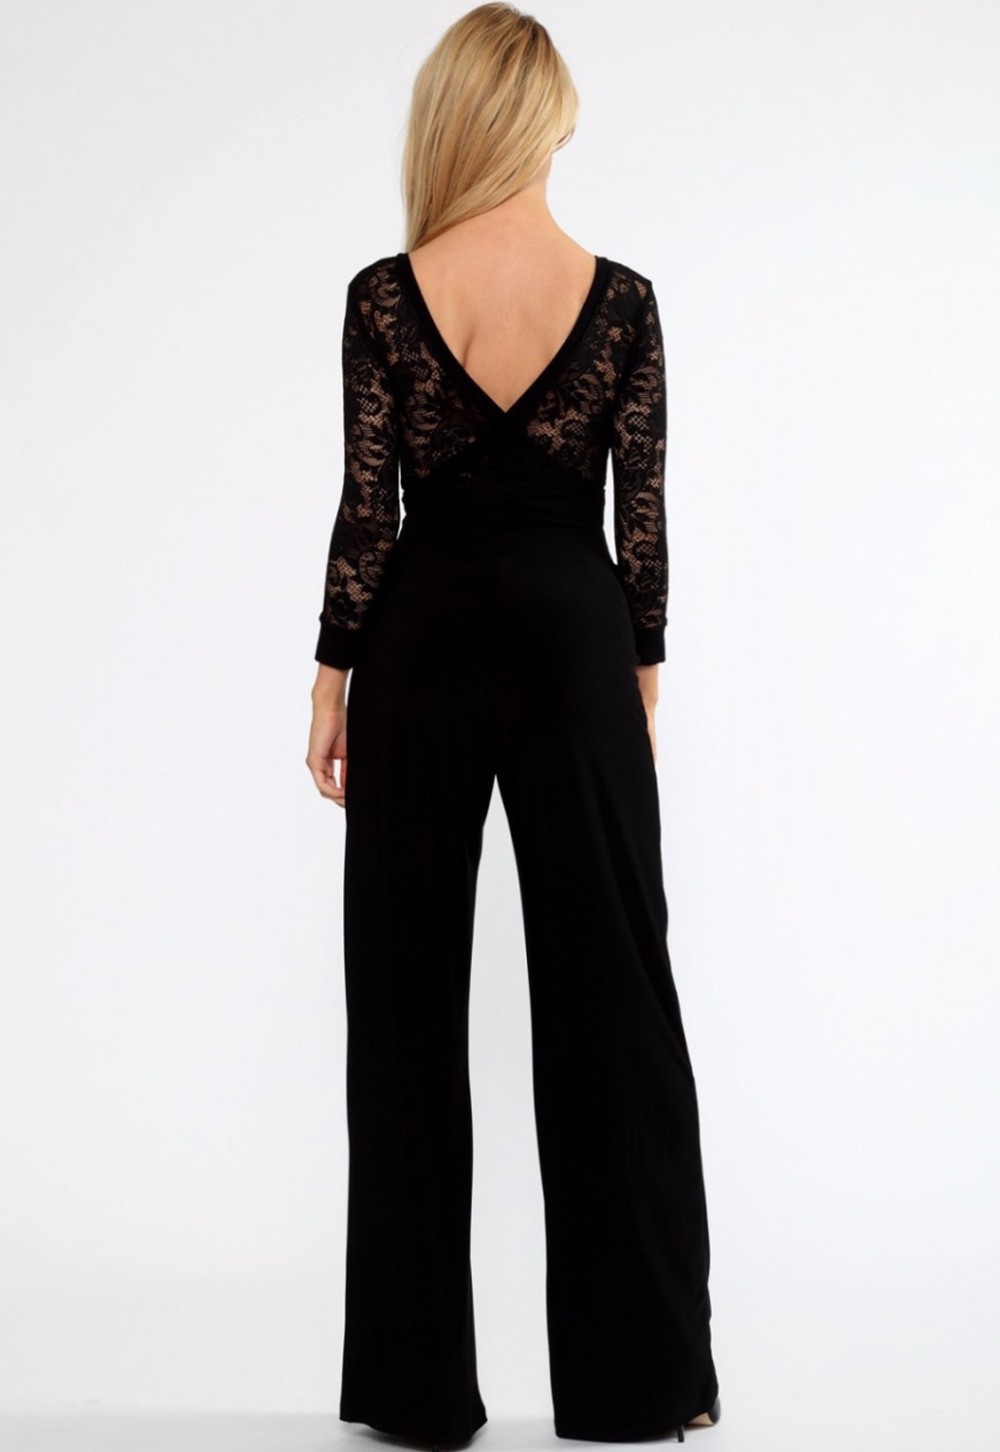 Black-Flared-Pant-Lace-Sleeve-Jumpsuit-LC6424-3